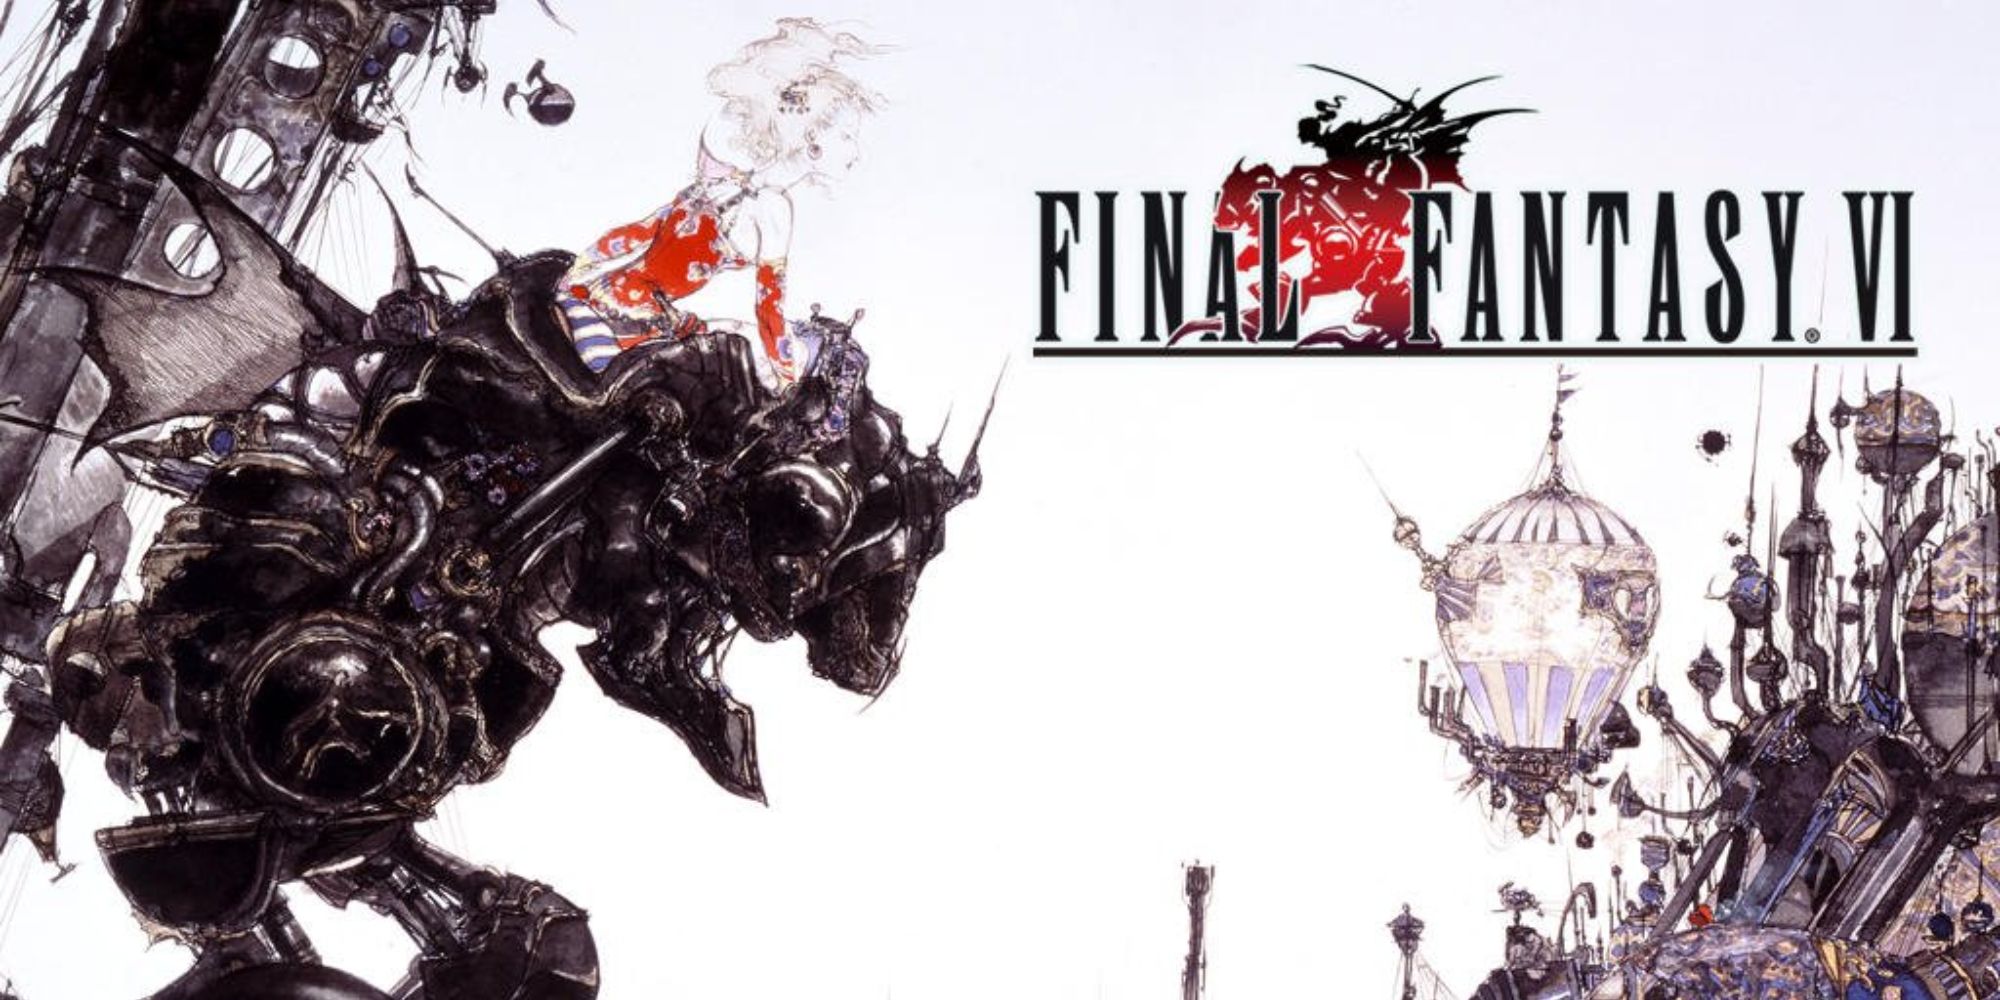 Games With Short Development Times the cover art and logo for Final Fantasy 6 featuring Terra Branford on top of a black mech overlooking a city